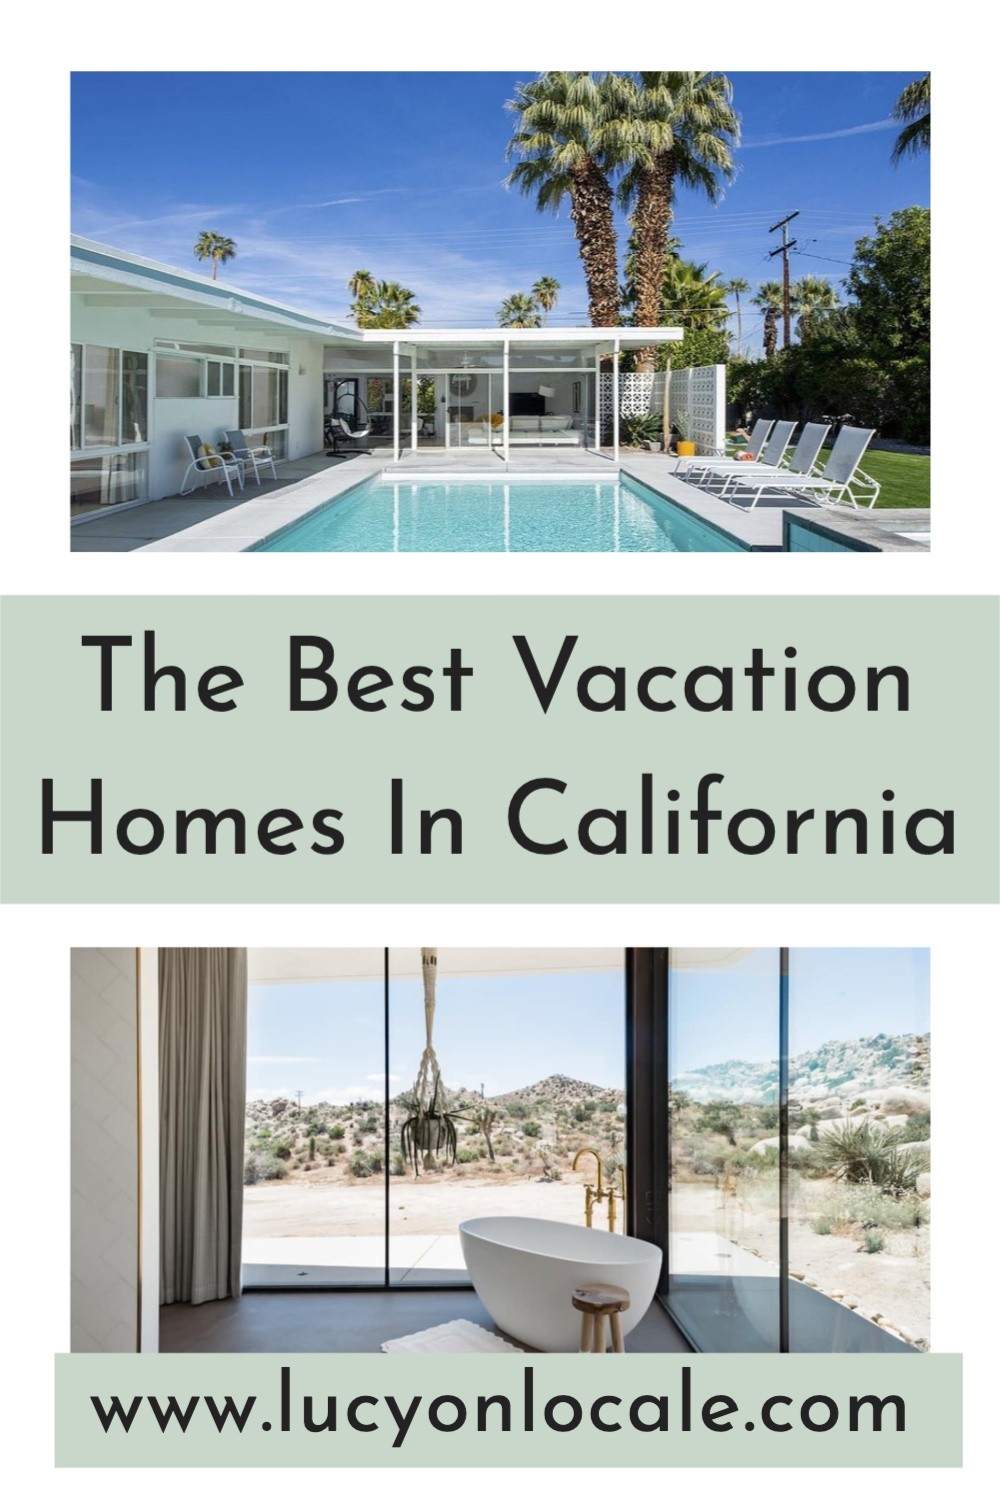 The best vacation homes in California